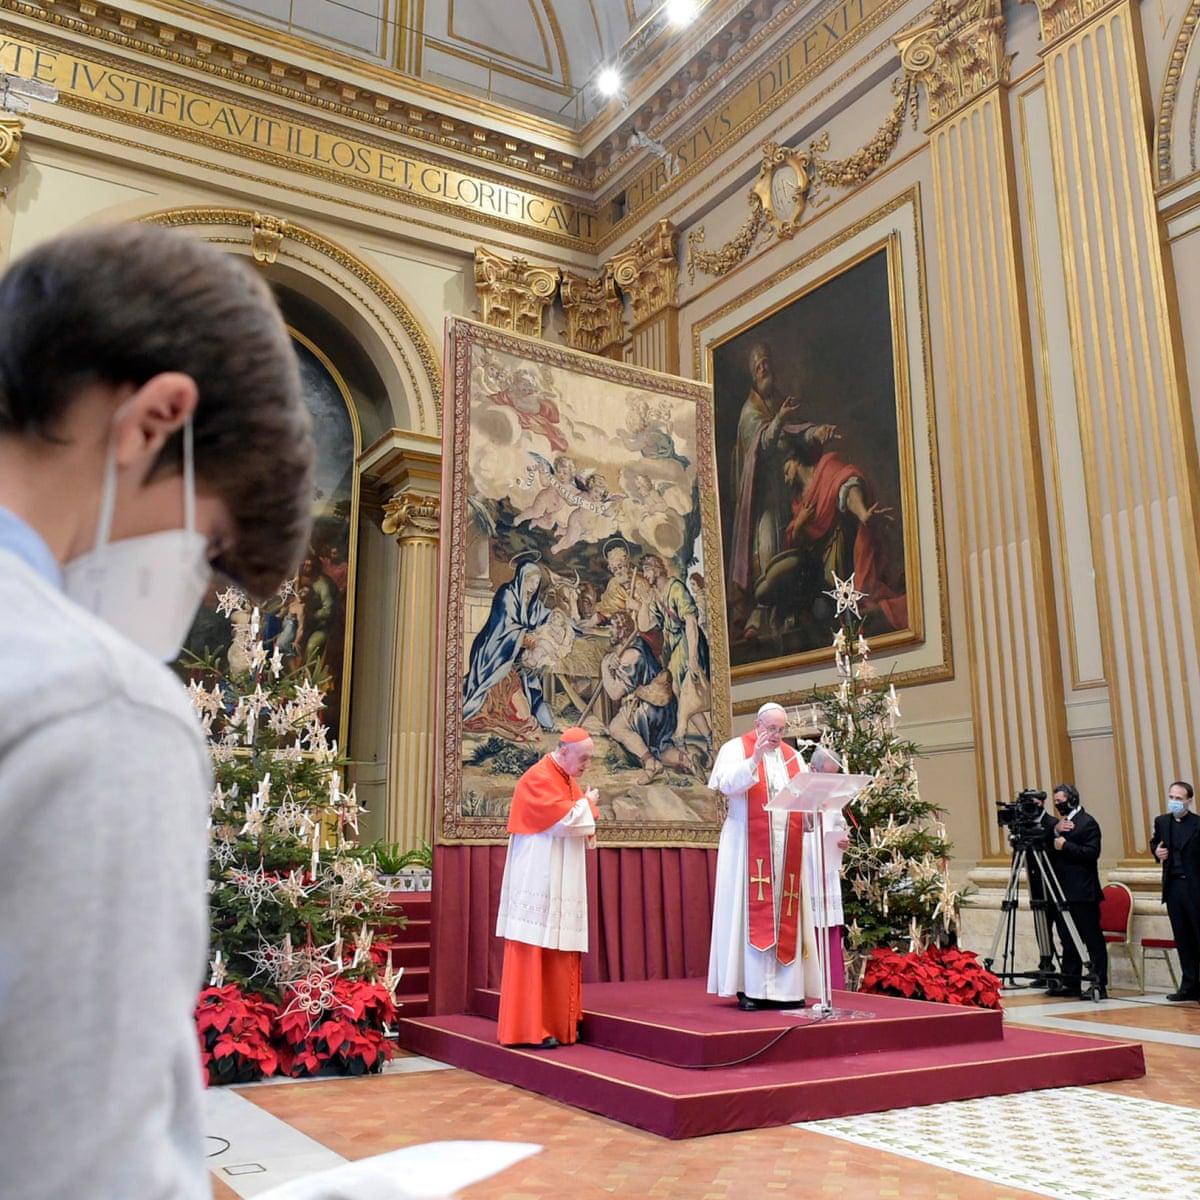 Pope Francis does not read his Christmas message in the usual way